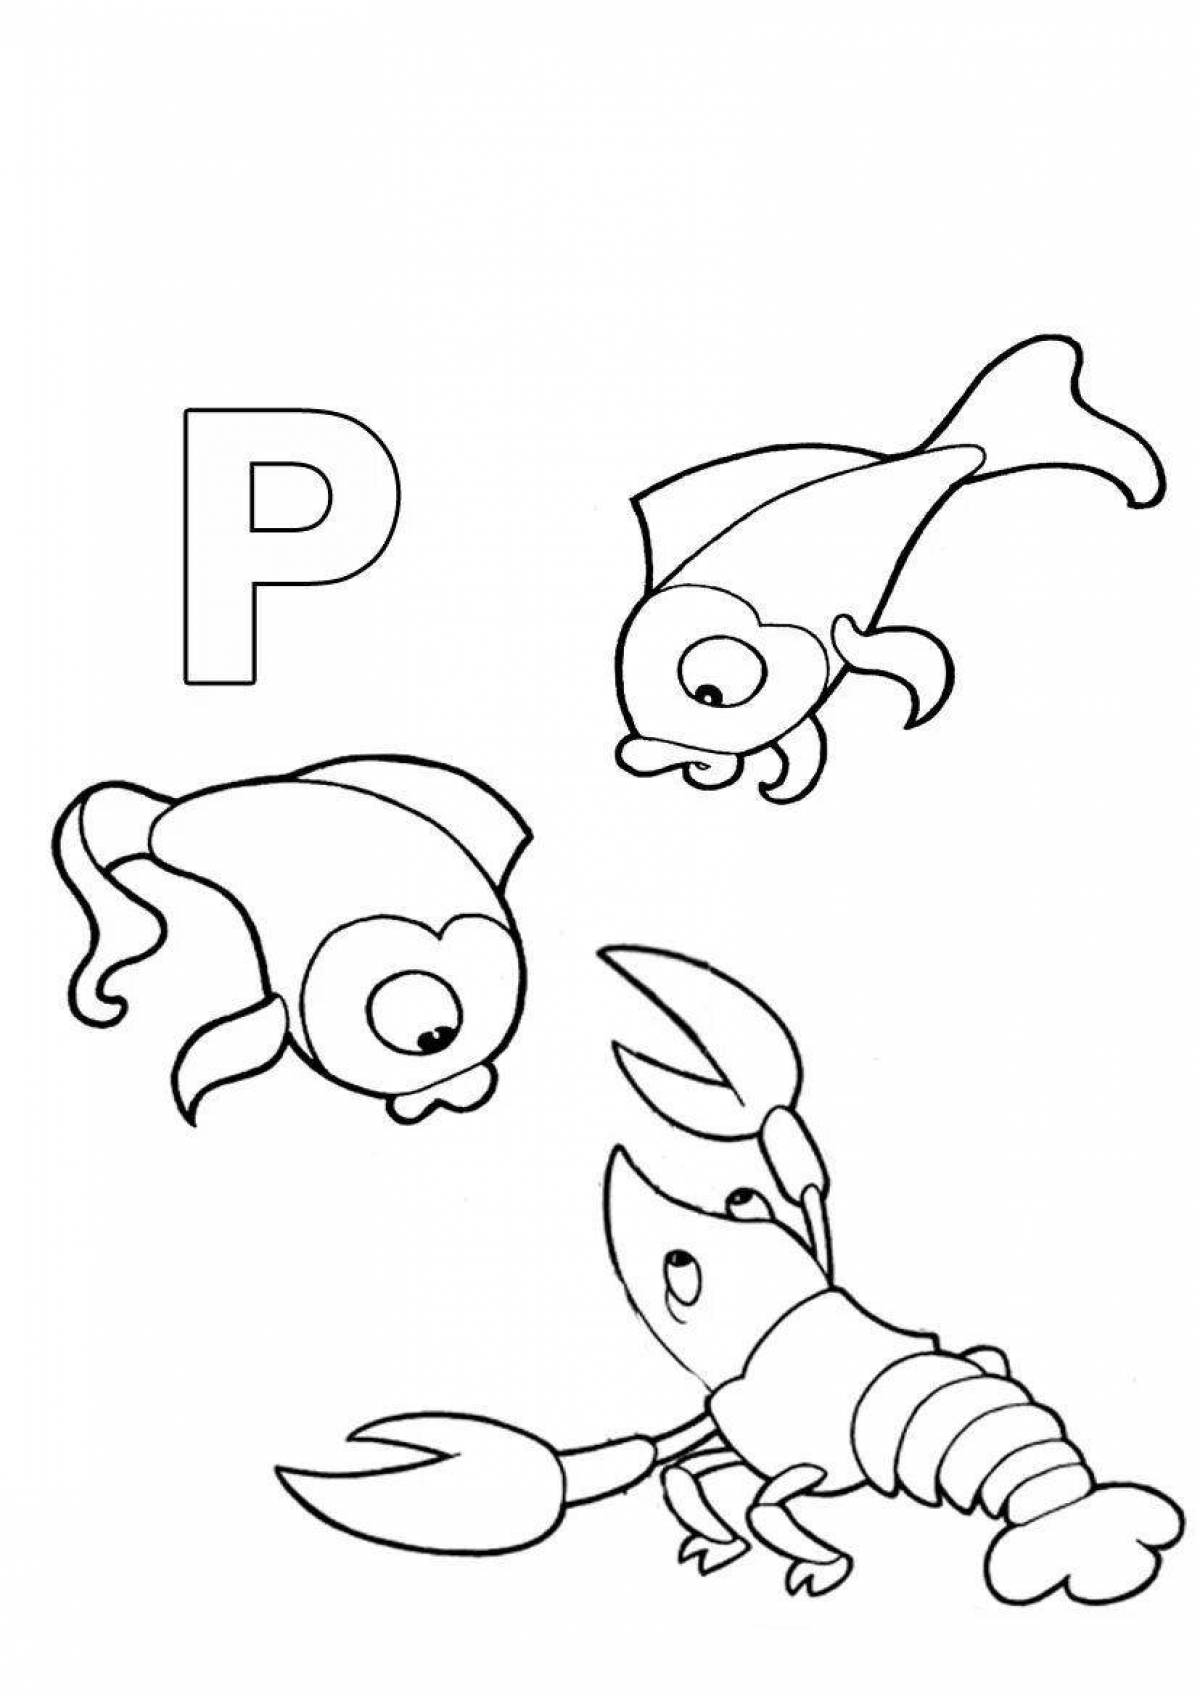 Fun letter p coloring book for kids